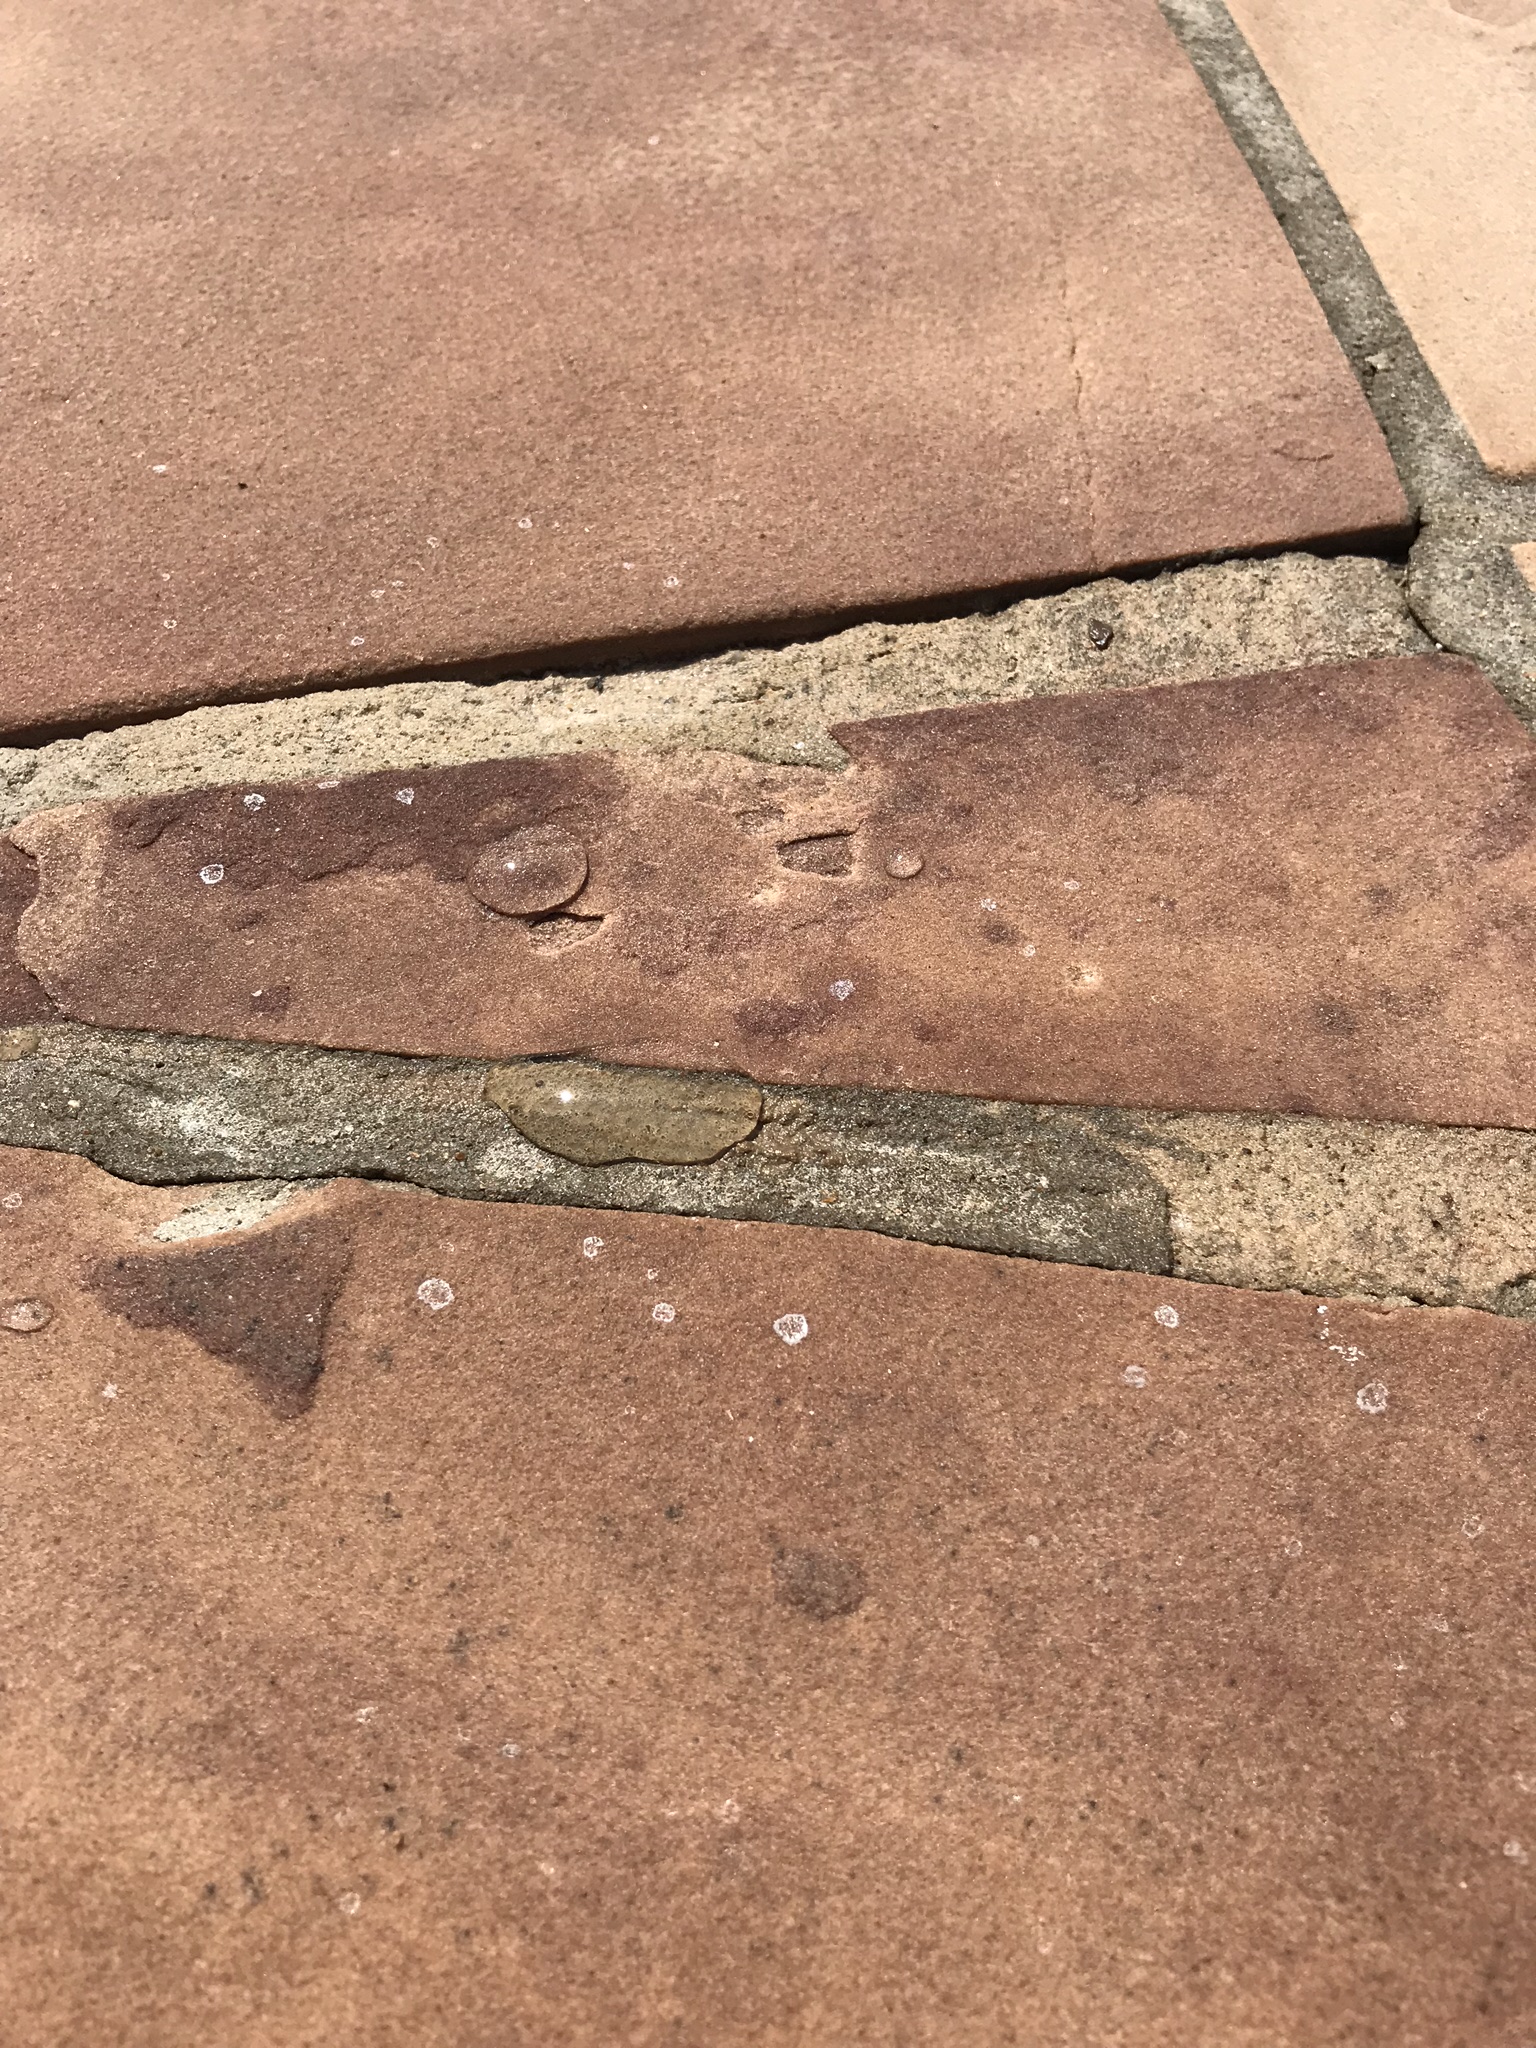 A few hours after we sealed the flagstone, we tested our application with a bottle of water. As you can tell, our water does not absorb into the stone at all. As a matter of fact, it beads up and is easily blow aside by the wind or a leaf blower (for those who enjoy some heavier outdoor toys).